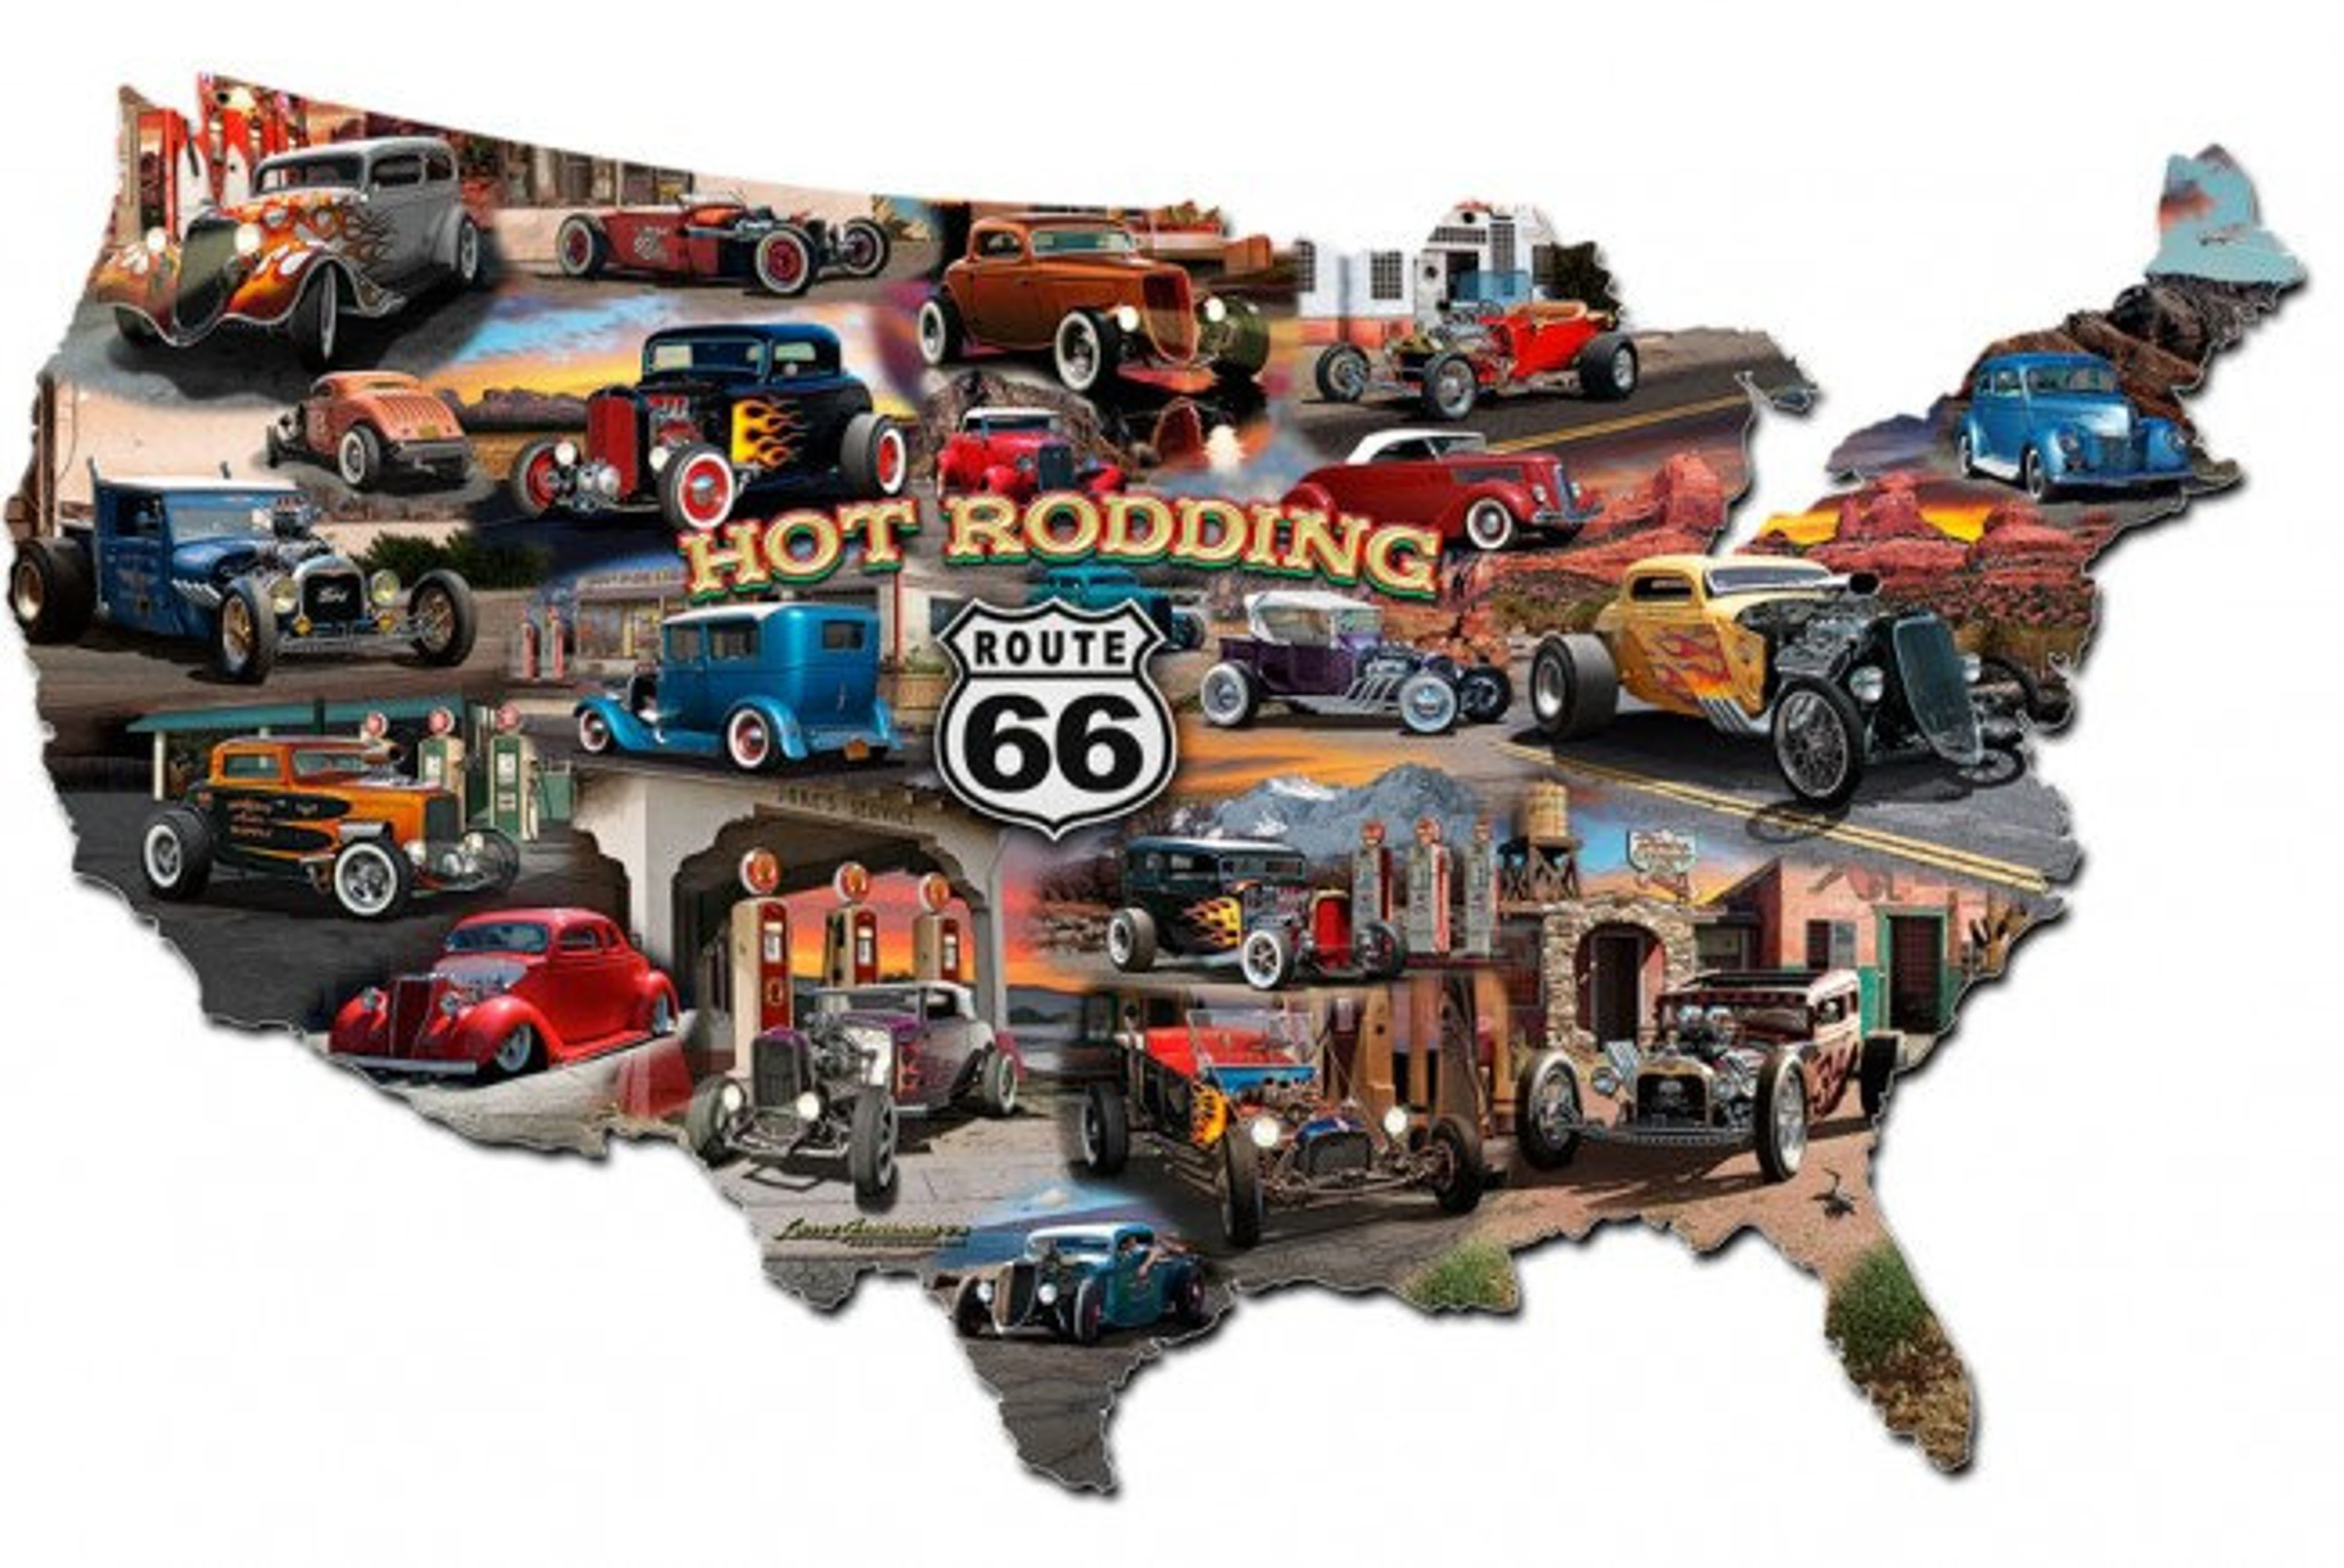 United States Hot Rod Route 66 Map 25 x 16 Inches Metal Sign American Made Vintage Style Retro Garage Art LG653 PS